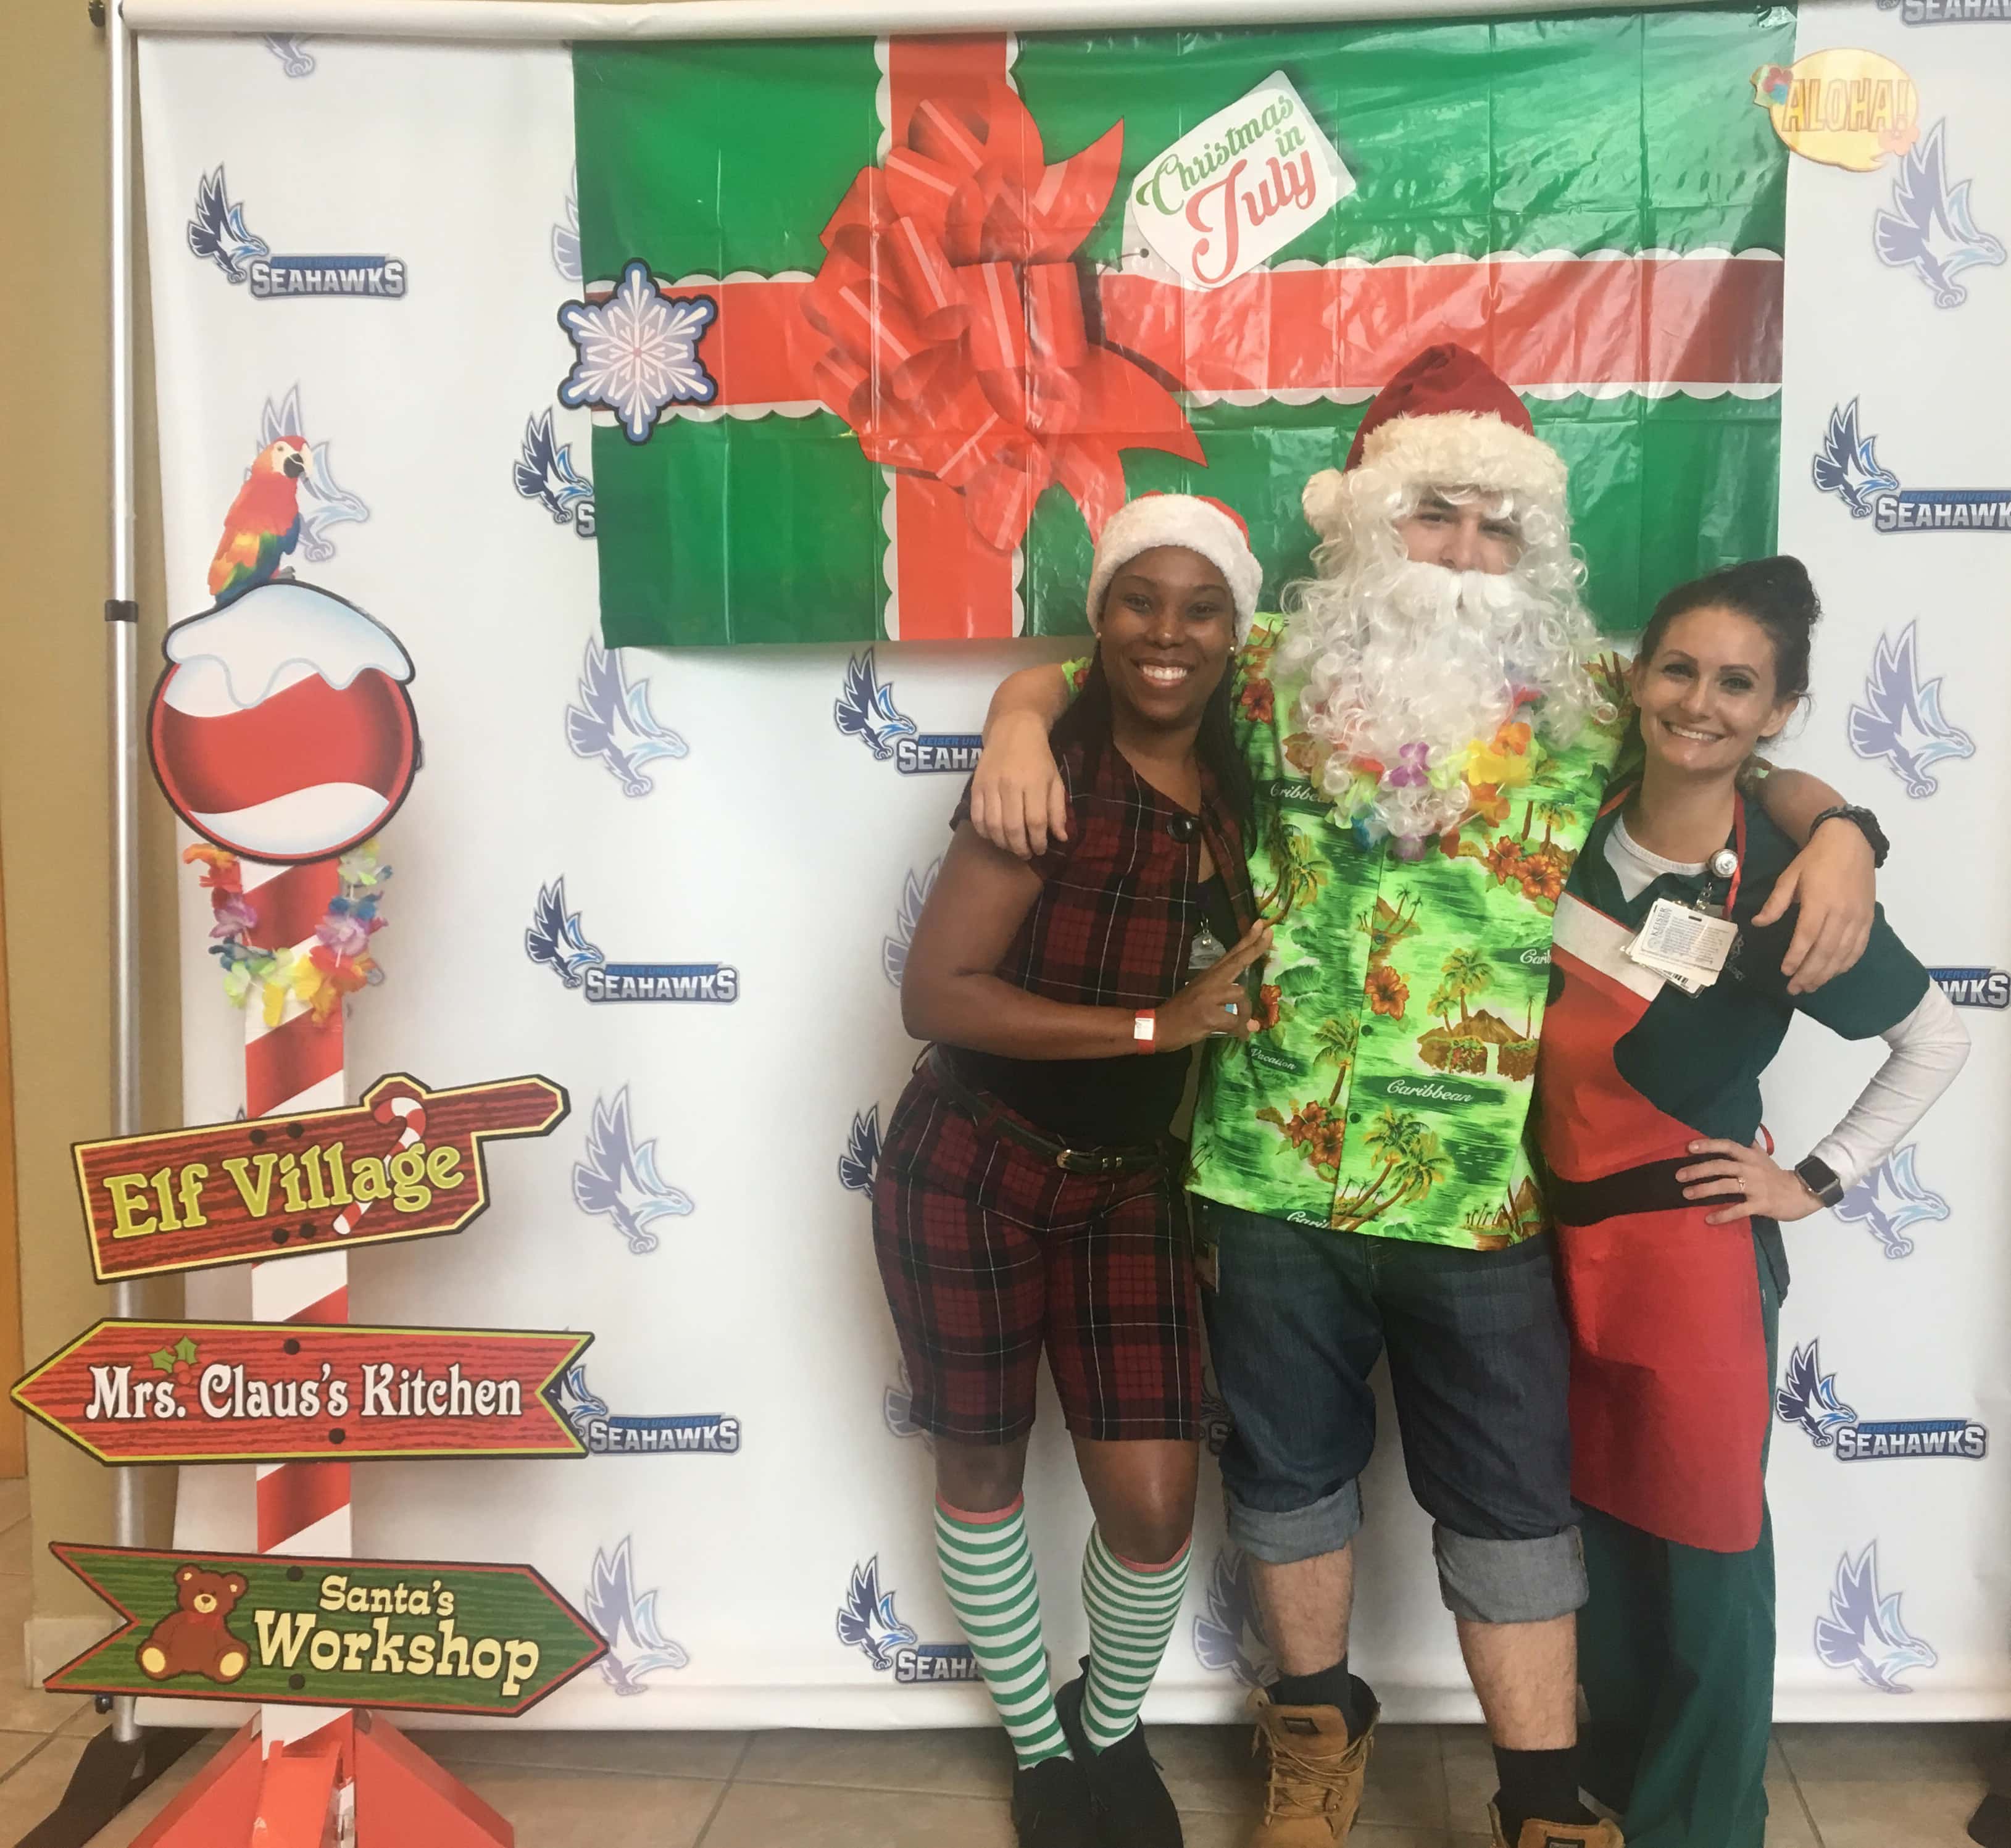 Christmas in July Benefits Important Cause